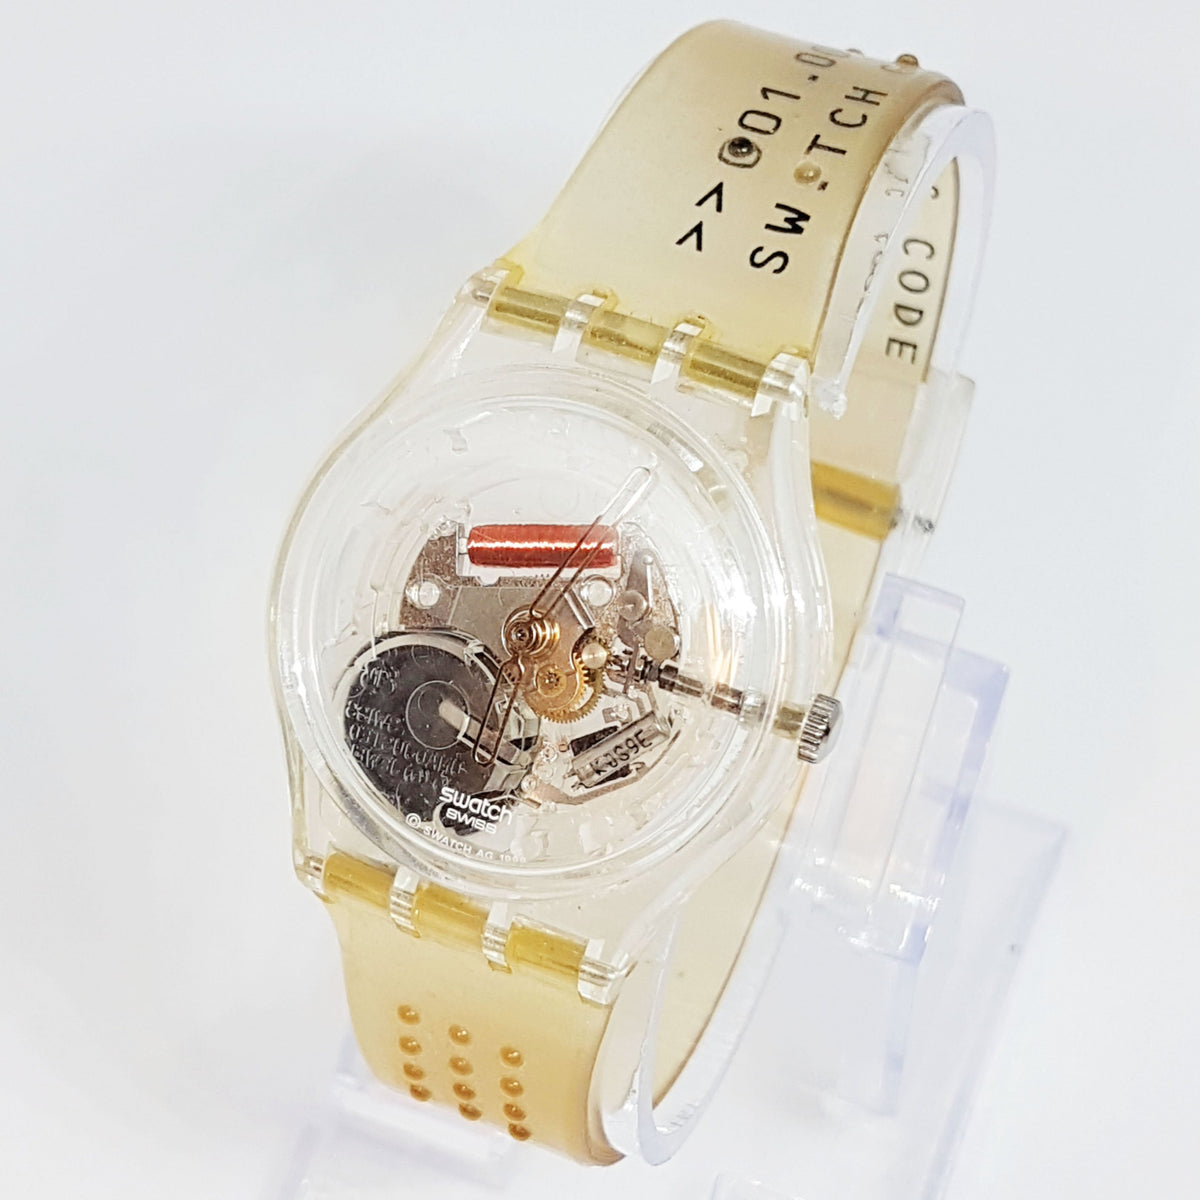 GENETIC CODE GZ164 Vintage Swatch Watch | RARE Mint Condition Swatch ...